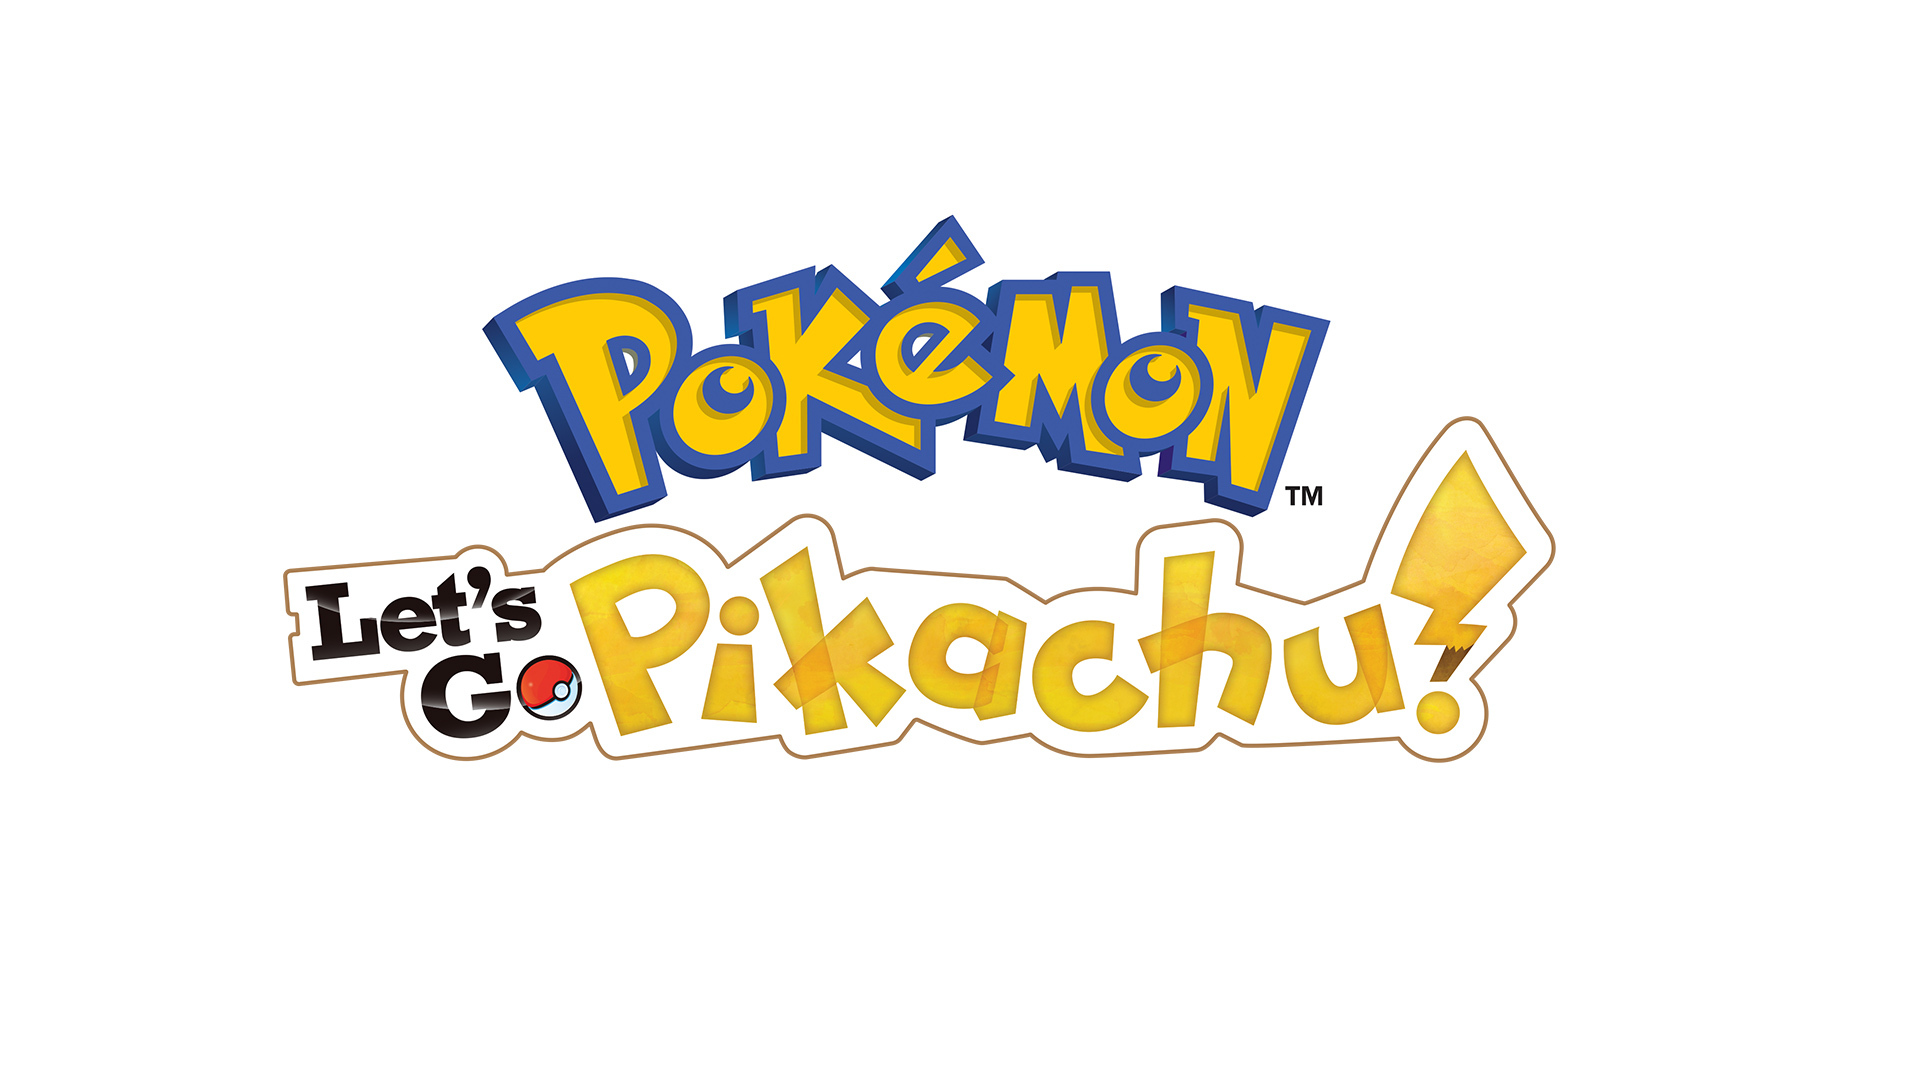 Nintendo News Visit The Pokemon Play Zone In Seattle To Play Pokemon Games And Meet Pikachu And Eevee Business Wire